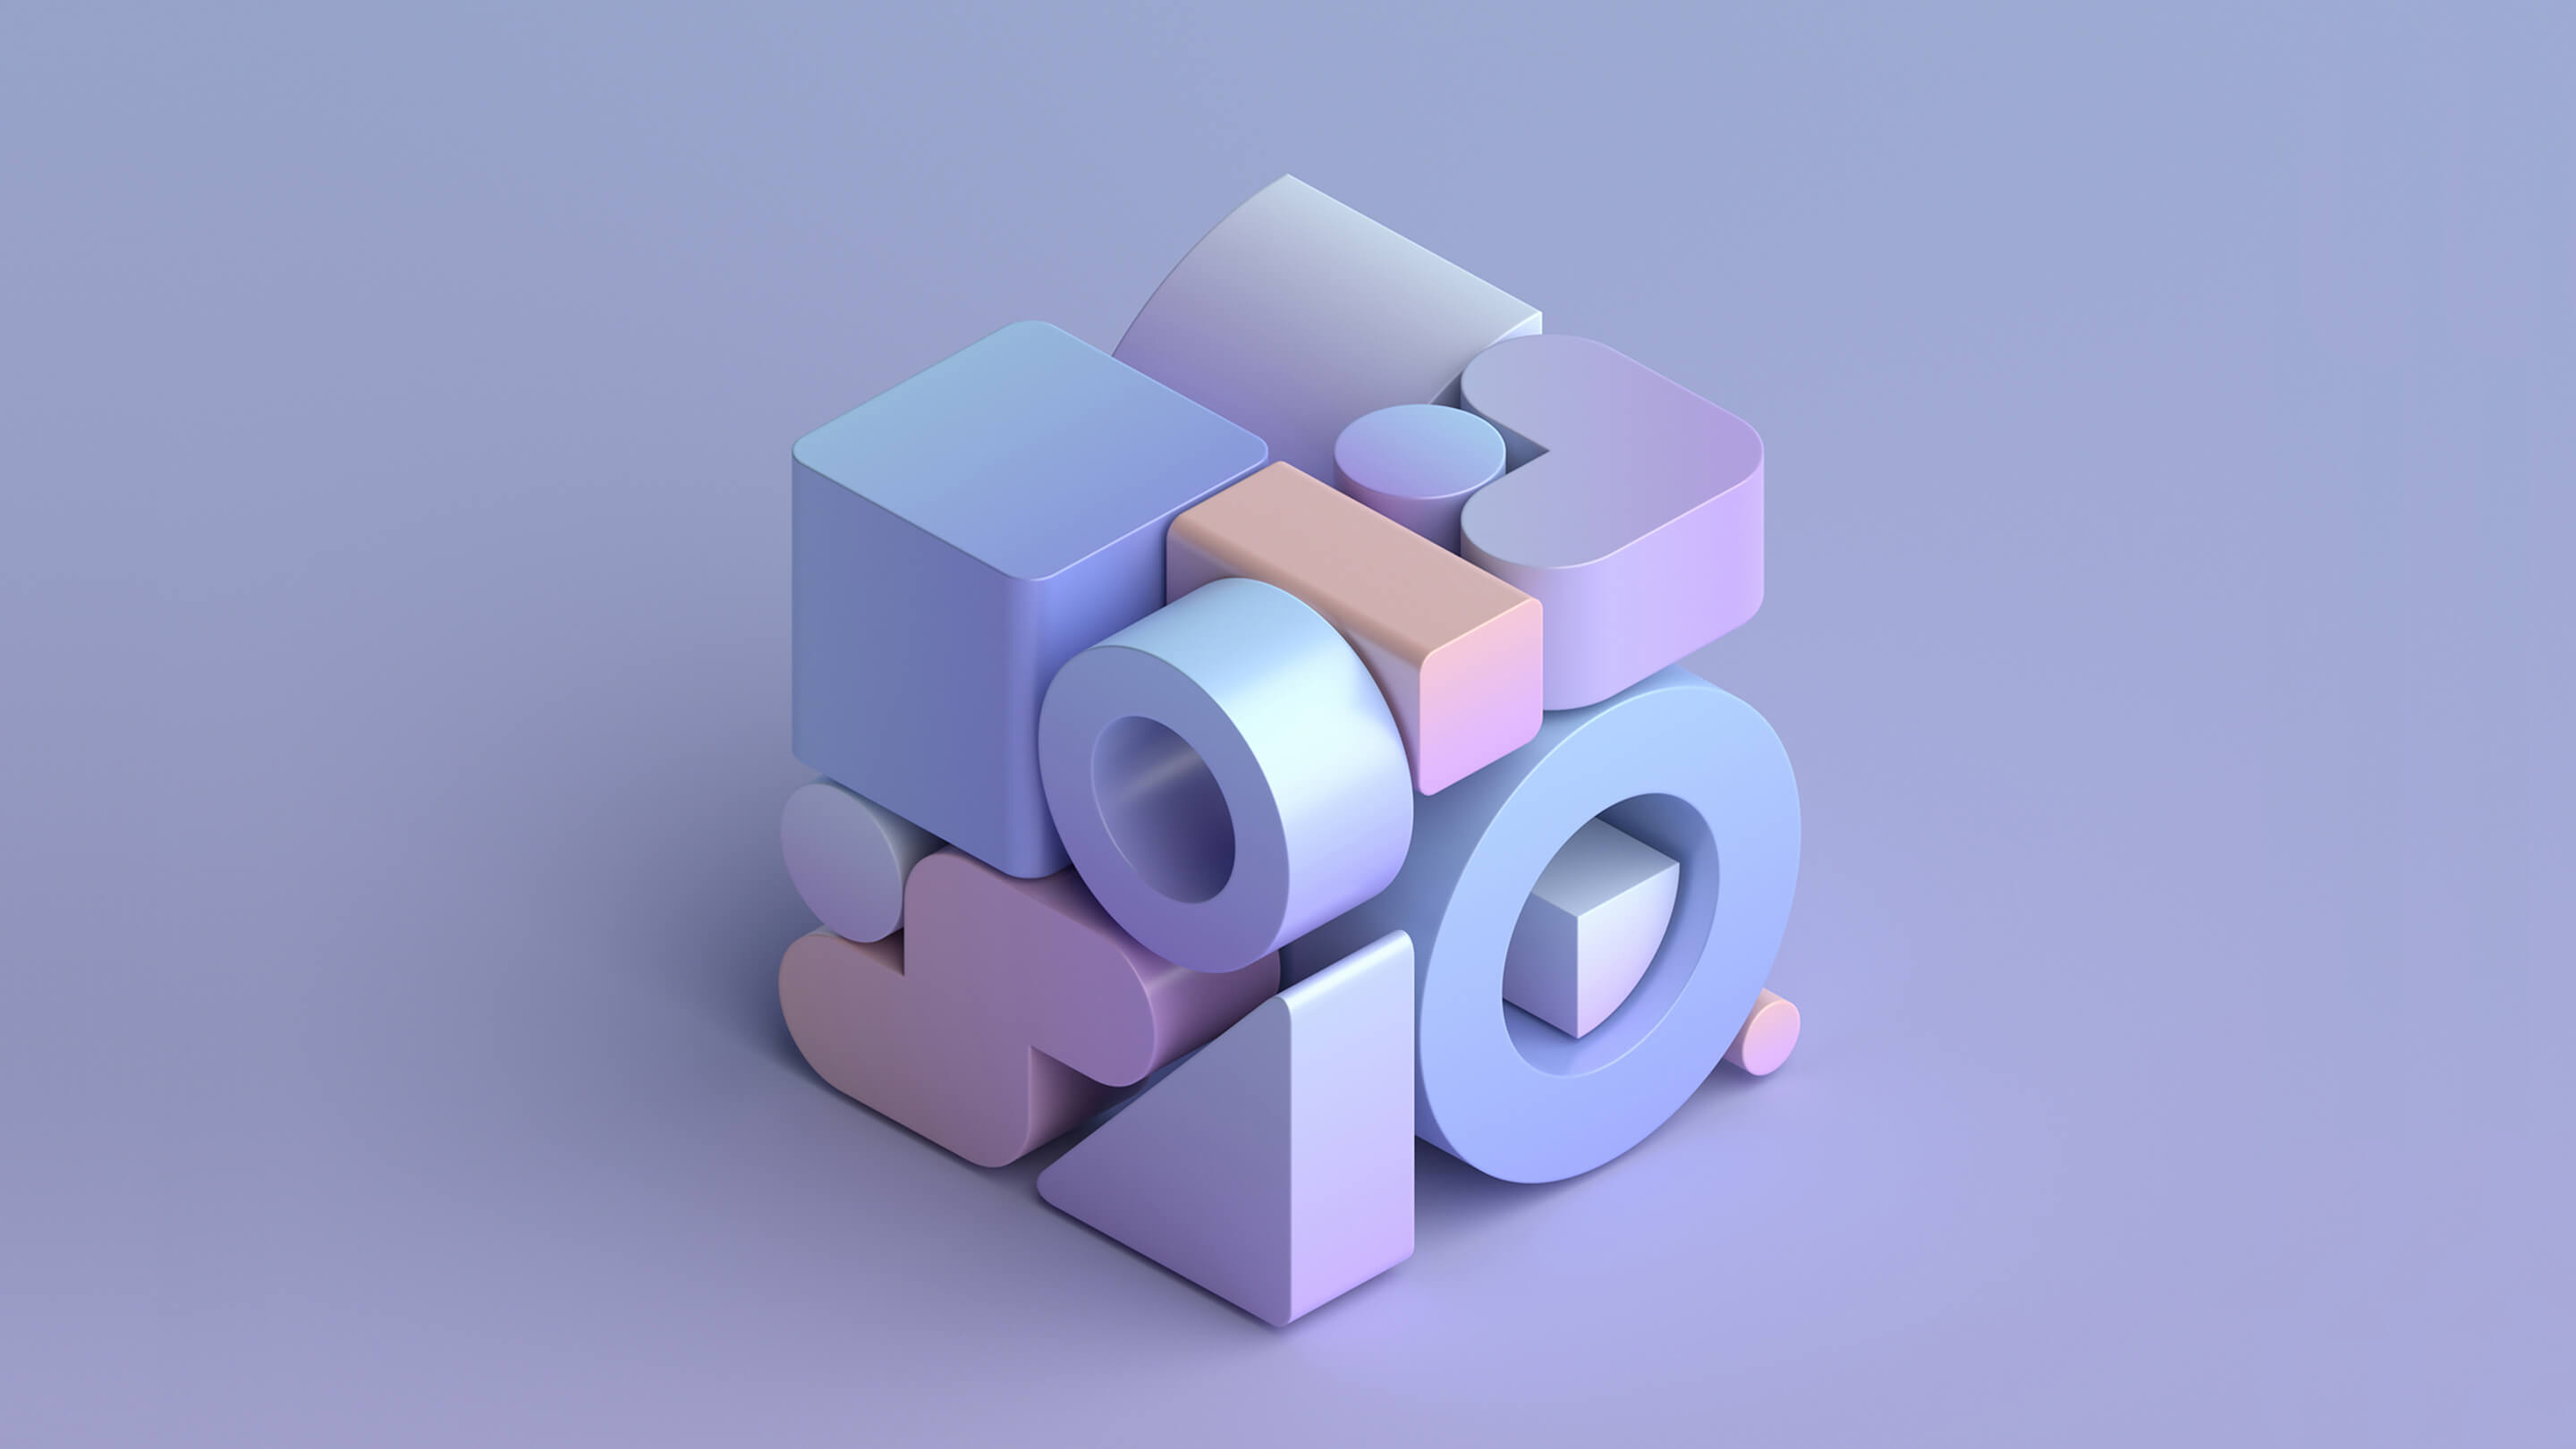 An assortment of icons forming a 3d cube